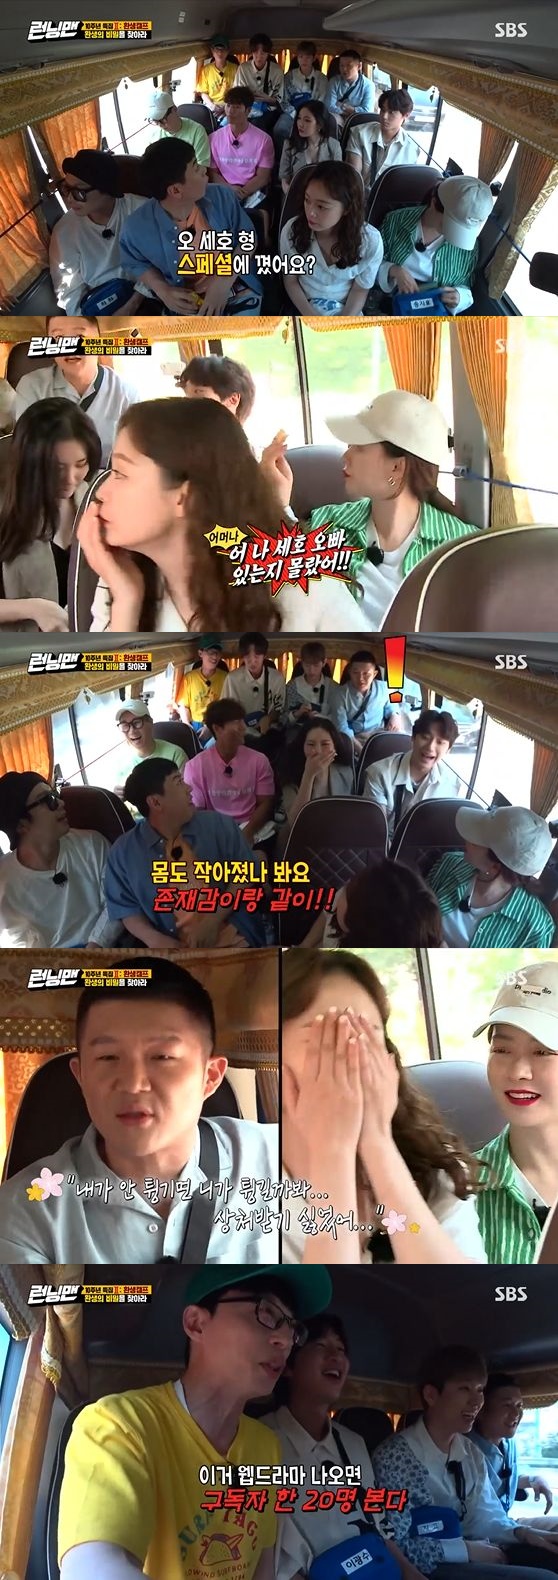 In the SBS Sunday entertainment Running Man broadcasted on the afternoon of the 5th, the second story of the 10th anniversary special feature was the Dead again Camp special race.On the day of the broadcast, the members of the Running Man on the Dead Again train greeted the guests who had already been in the car. While moving to the Dead Again Camp, Jo Se-ho said, It seems special to be invited to the special feature.Jeon So-min, who heard this, laughed, saying, Did you have Seho brother? I did not even know I was there. I lost weight, my body became smaller, and my presence became smaller.Jo Se-ho responded to Jeon So-min, I do not know why I lost weight. I wanted to show a more changed appearance. Then Jeon So-min laughed and replaced the answer.Yoo Jae-Suk laughed at Jeon So-min and Jo Se-ho, saying, What is this between you? I feel like I will subscribe to 20 people in a web drama.